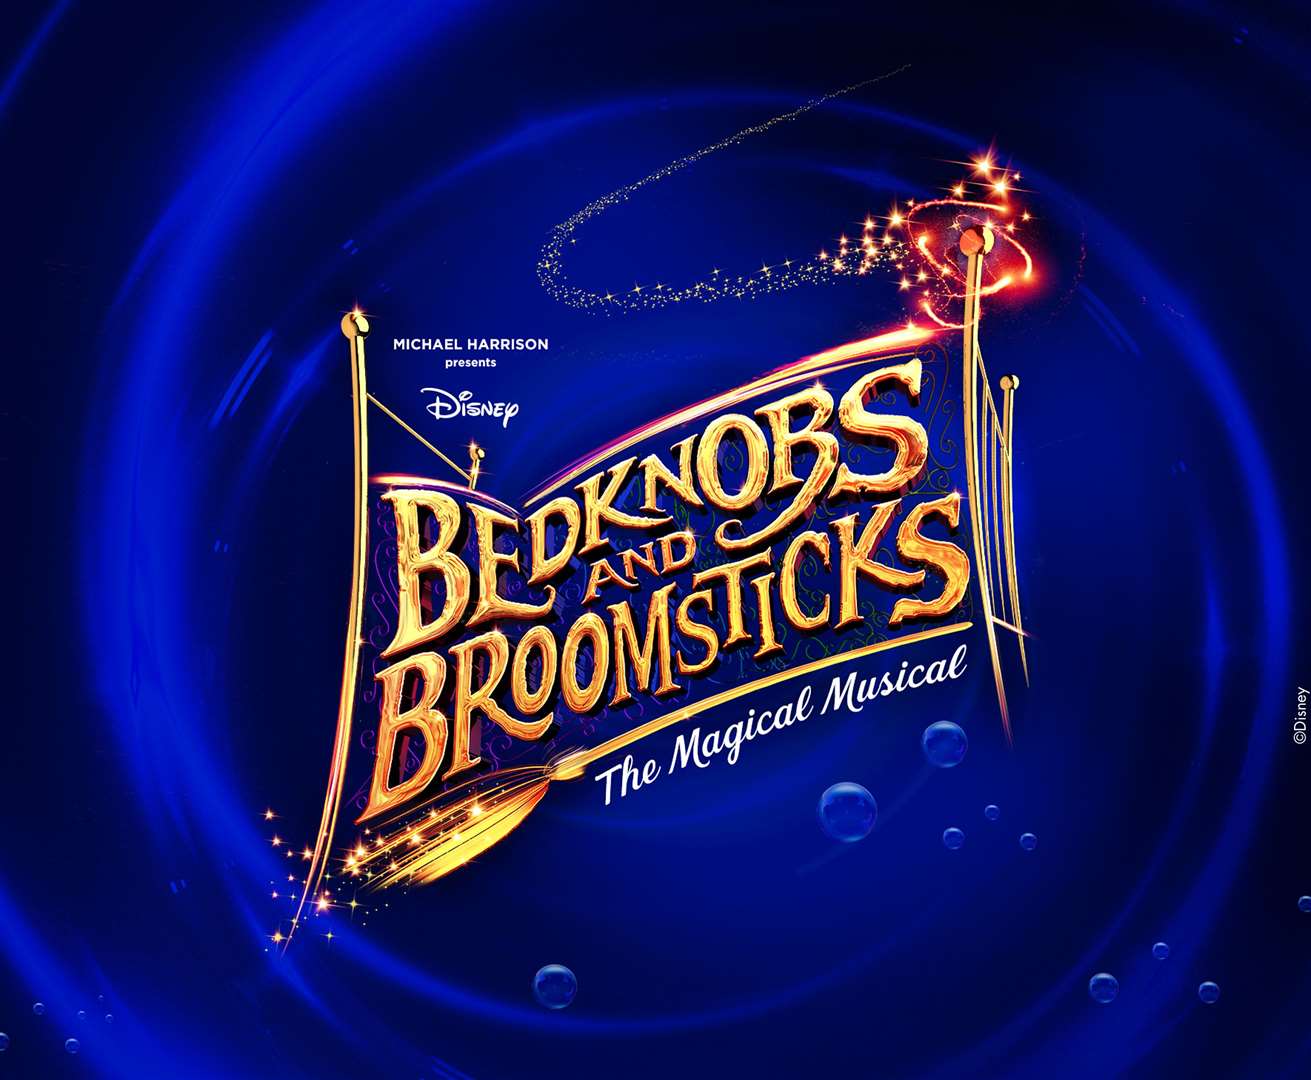 Bedknobs and Broomsticks is coming to The Marlowe in Canterbury. Picture: The Marlowe Theatre (43603243)